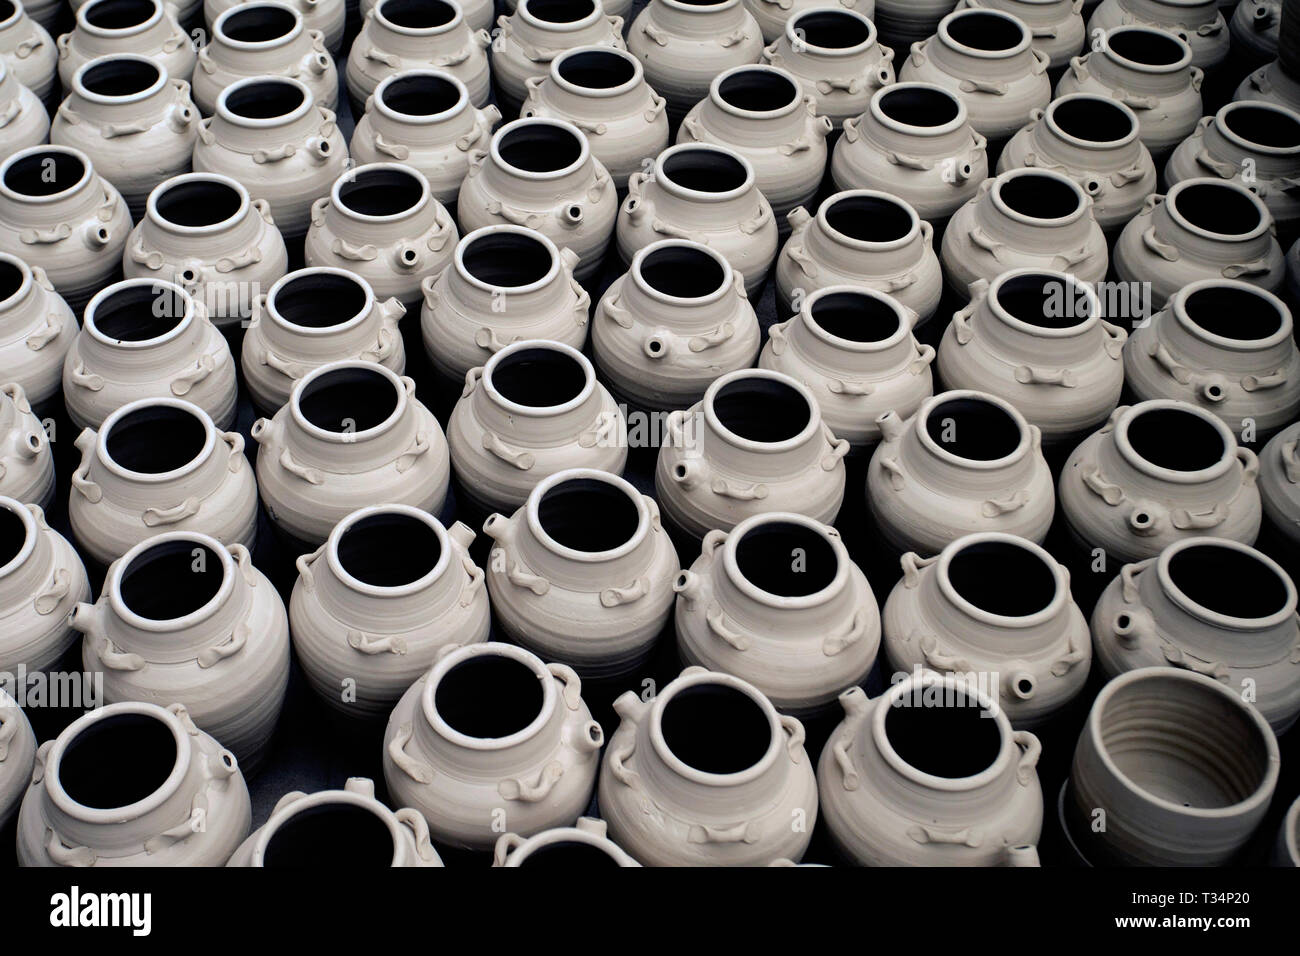 Overhead view of clay pots, Indonesia Stock Photo